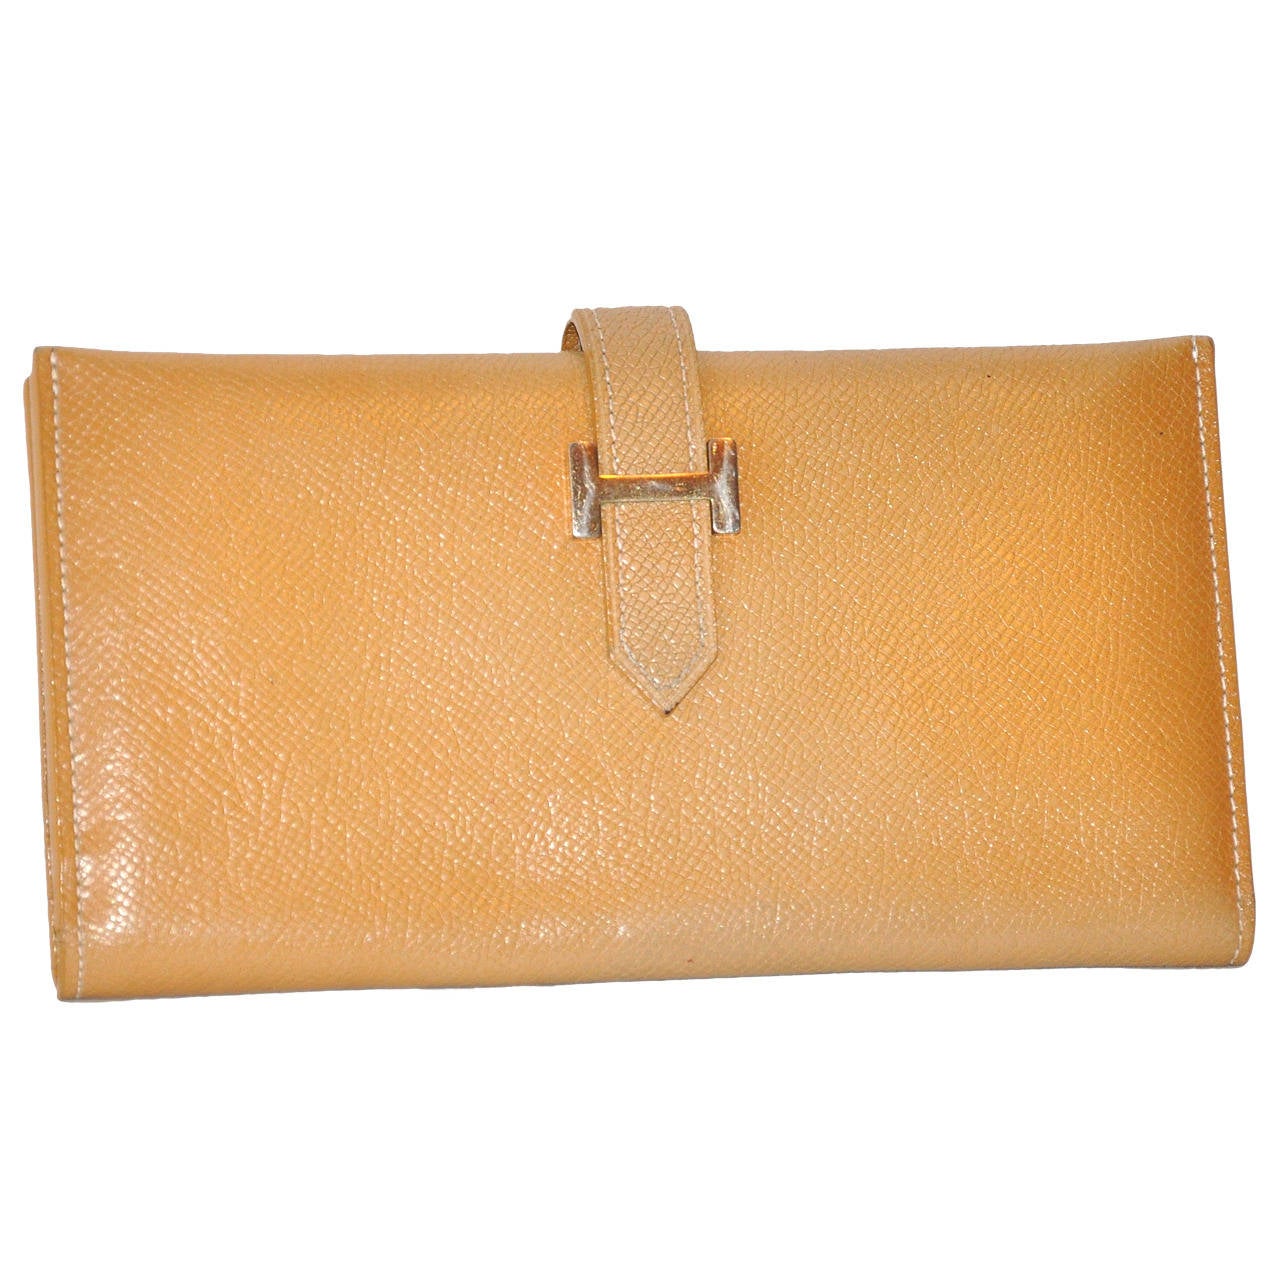 Hermes Textured Tan Billfold Wallet with Signature "H" Gold Hardware